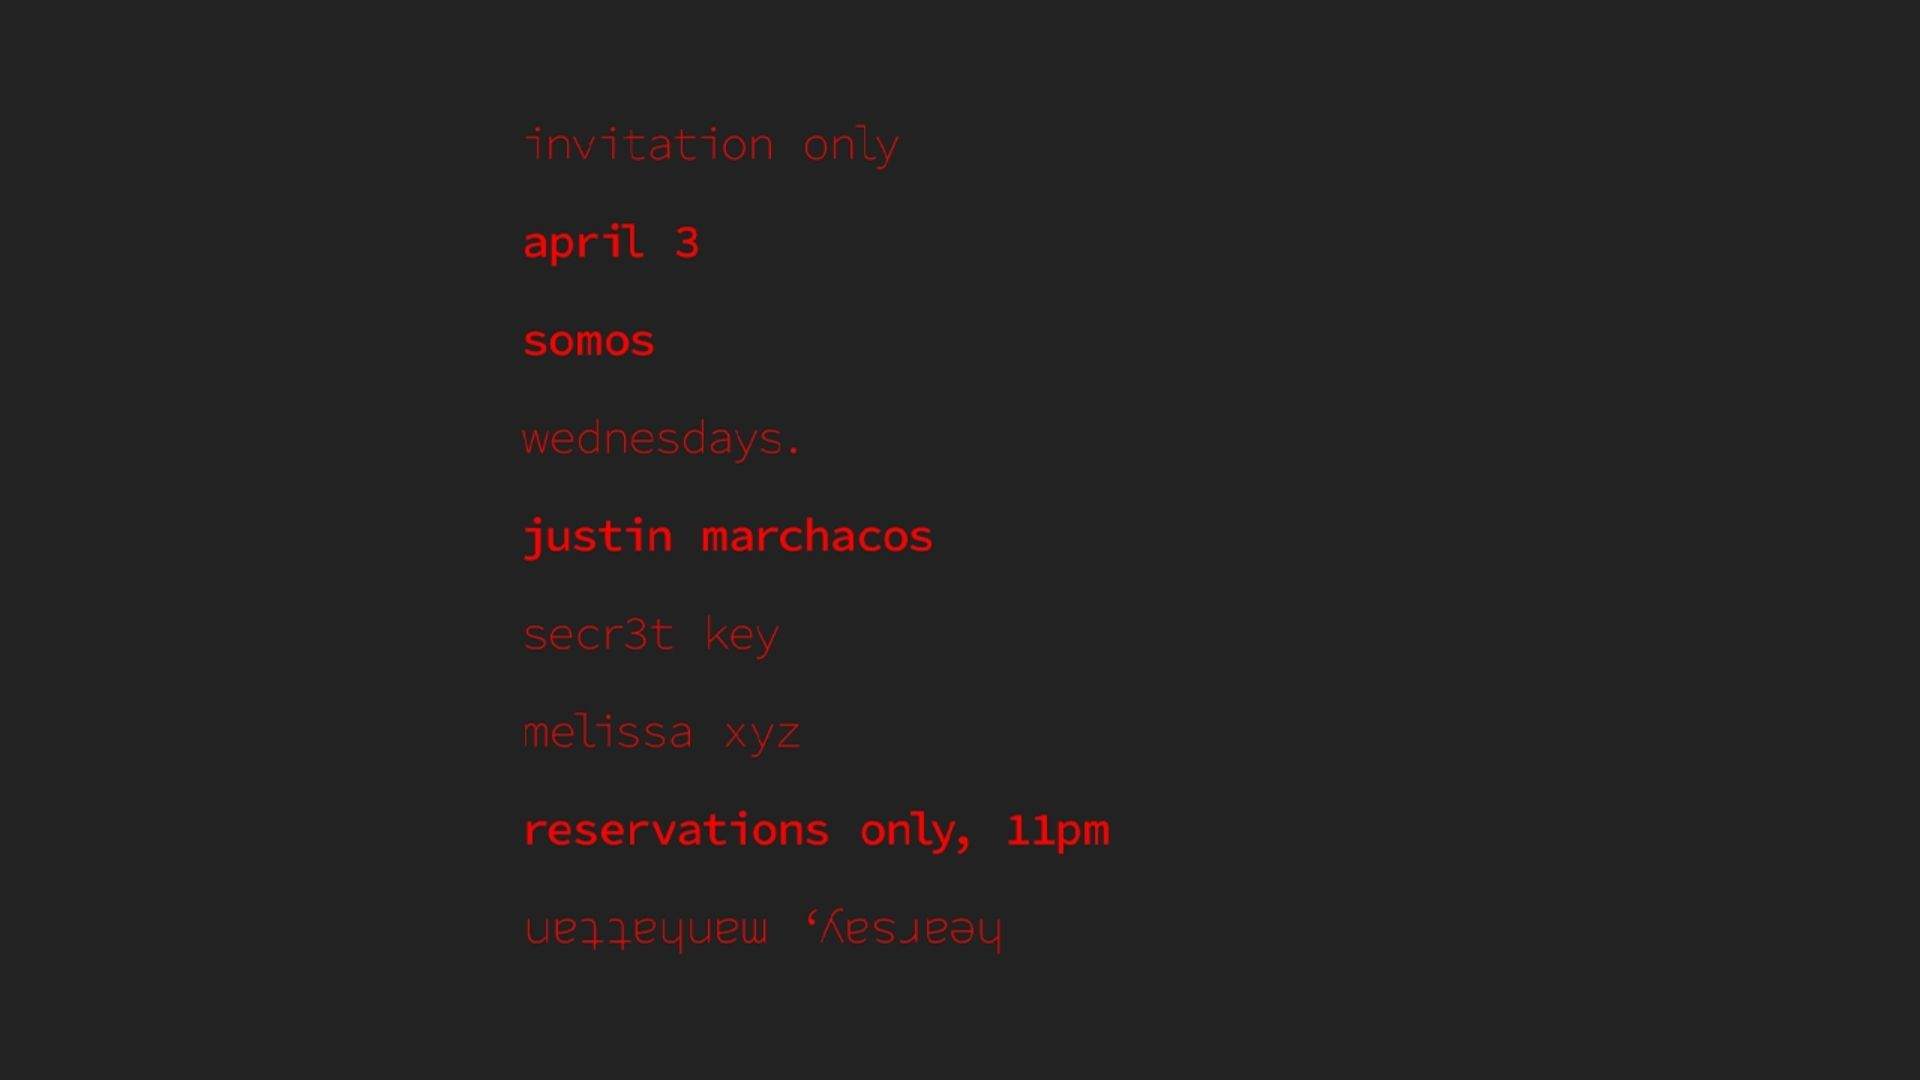 Hearsay: SOMOS with Justin Marchacos, SECR3T KEY, Melissa XYZ (APR 3) (INVITE ONLY) - フライヤー表